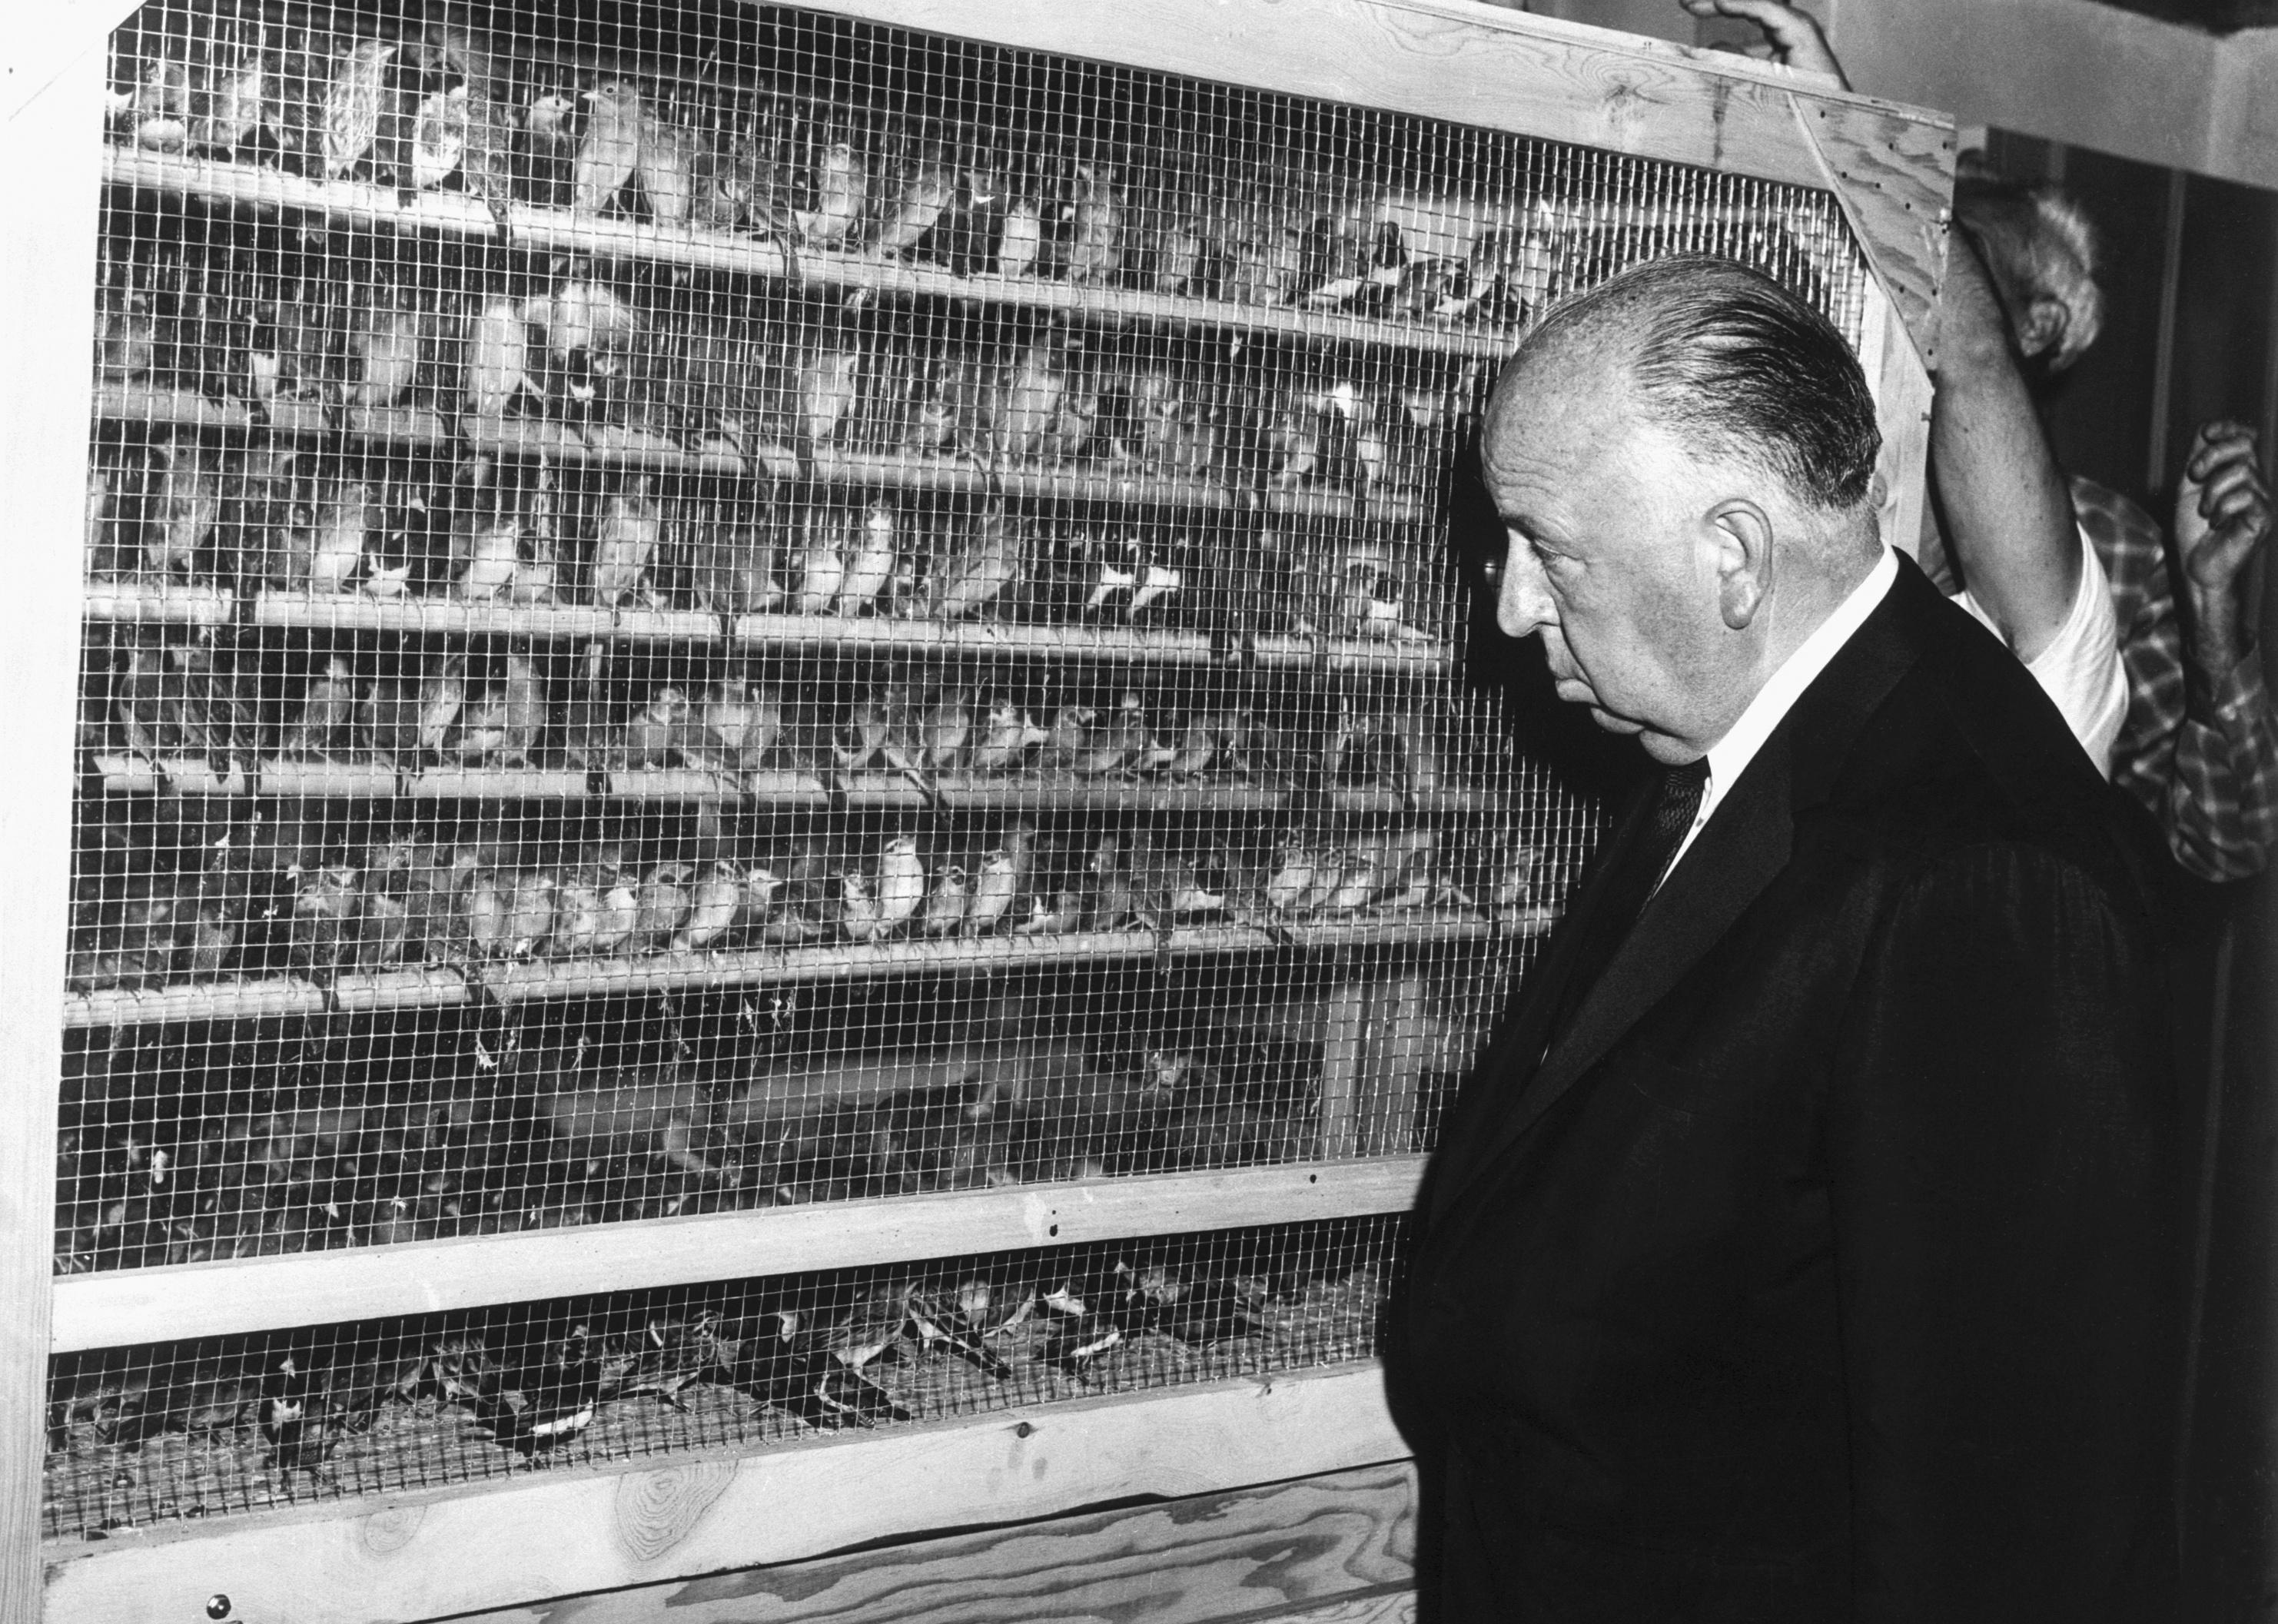 Alfred Hitchcock inspects finches appearing in his new film The Birds.